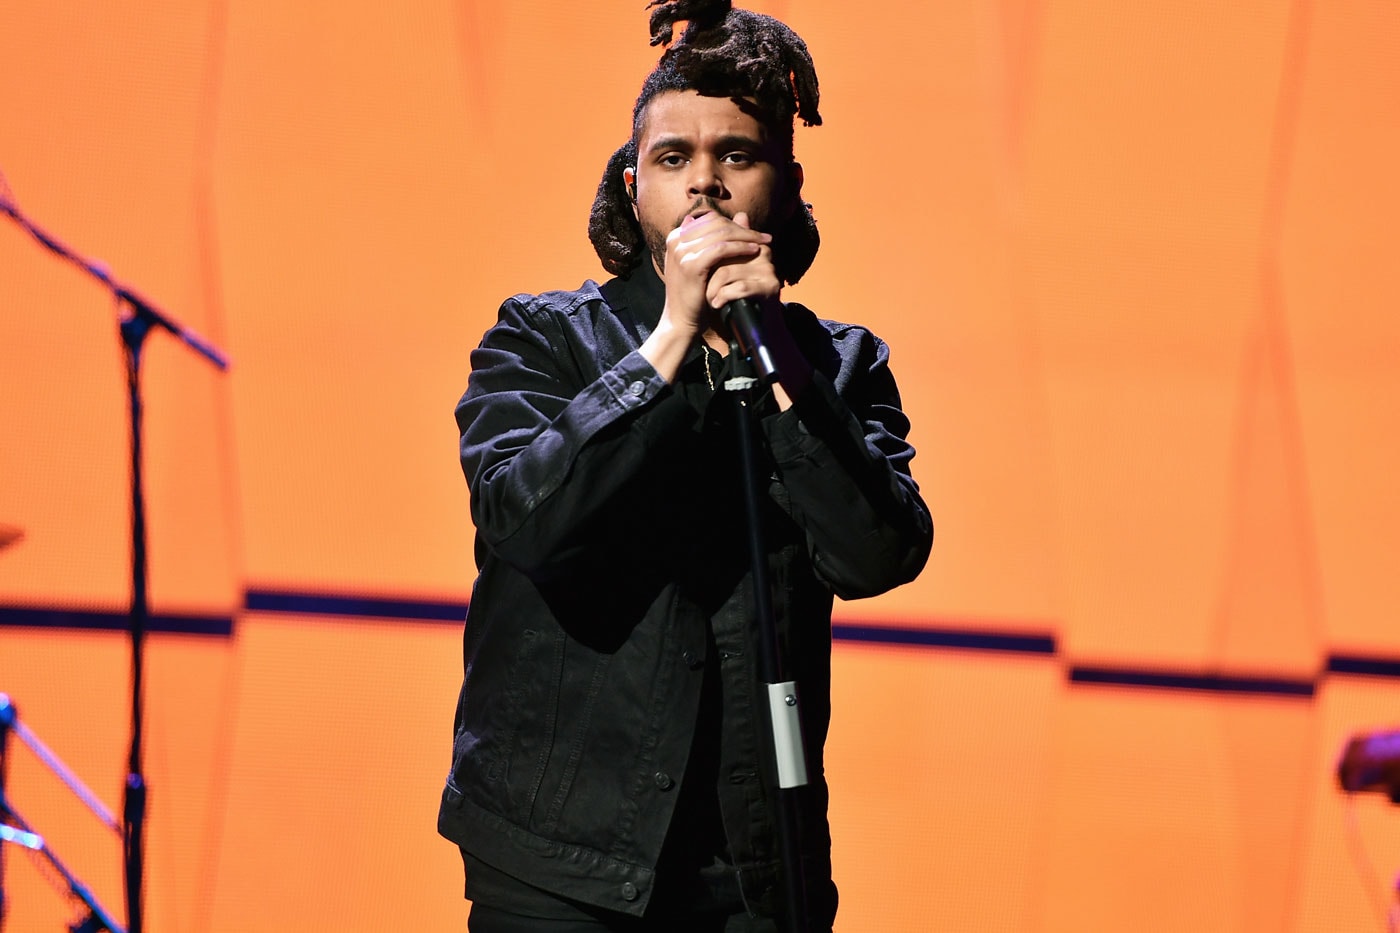 The Weeknd Performs Beyoncé’s "Drunk In Love" and 'Beauty Behind the Madness' Songs